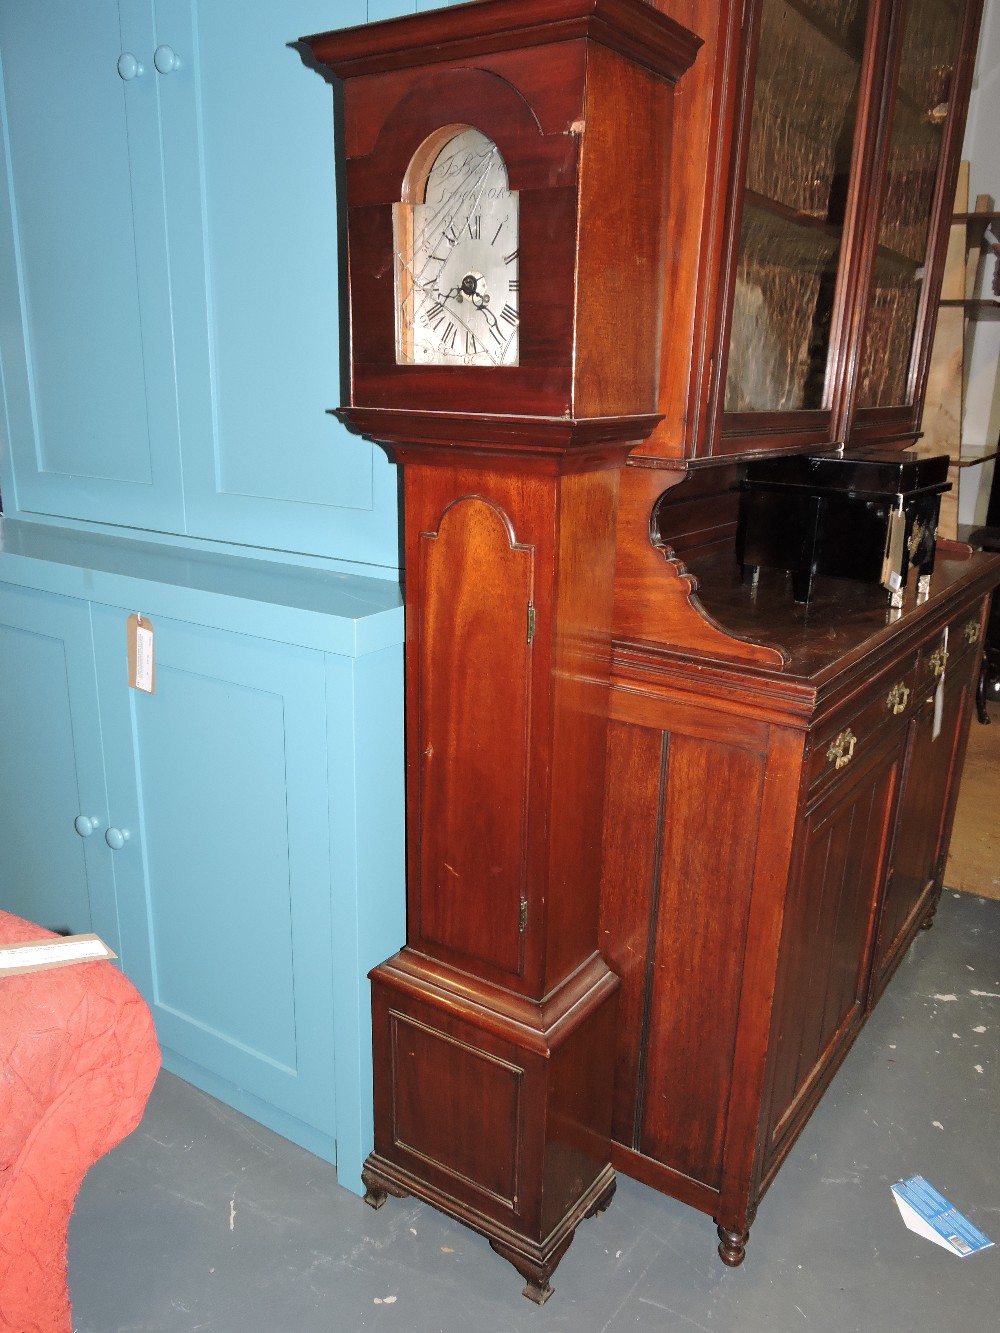 An early 20th century mahogany cased grandmother clock, the eight-day movement with arched